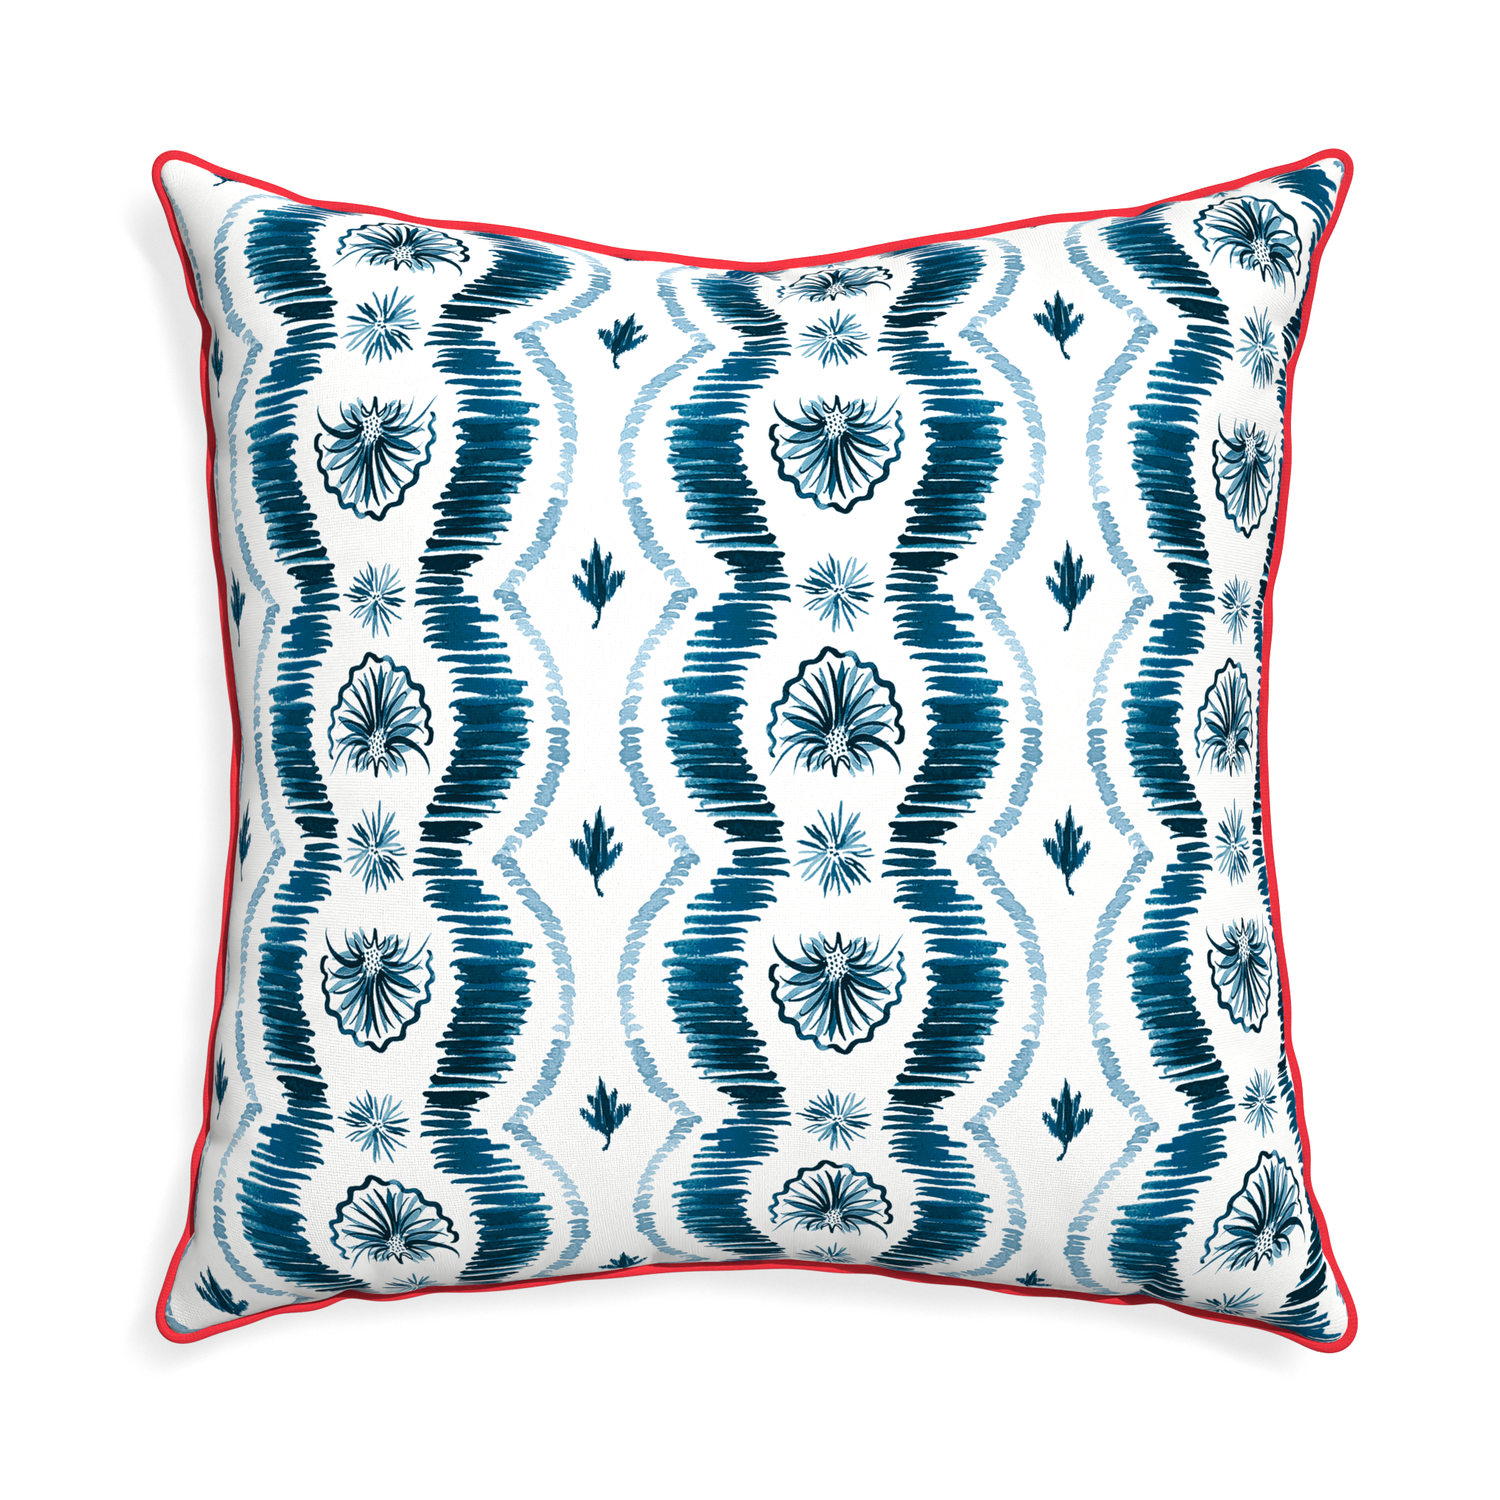 Euro-sham alice custom blue ikatpillow with cherry piping on white background